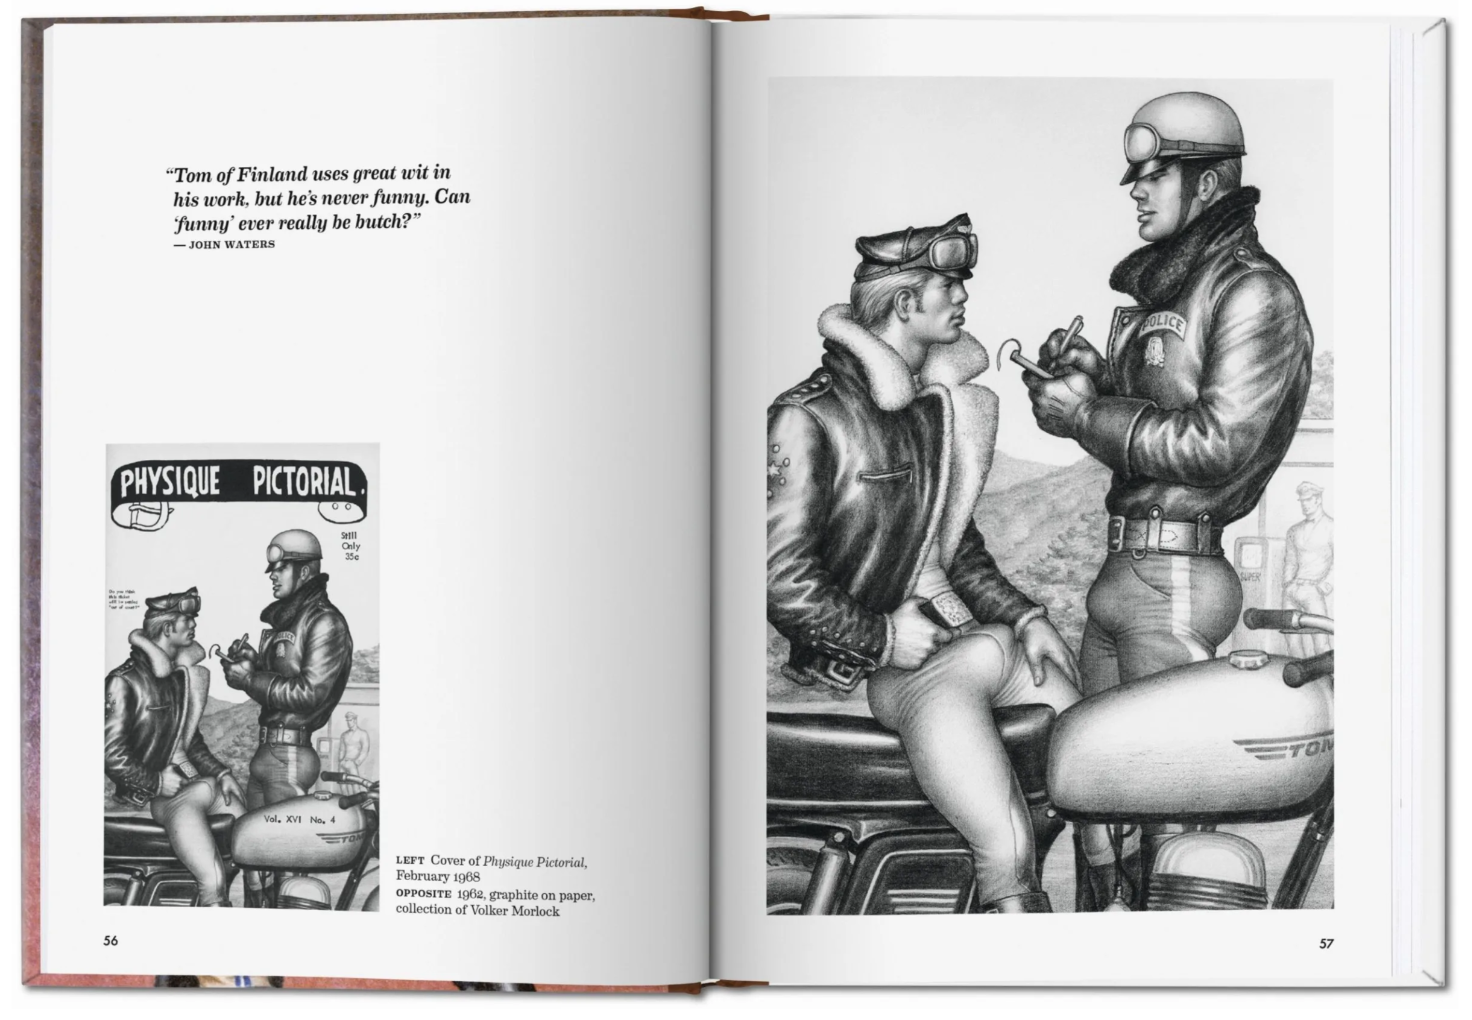 Tom of Finland Cops and Robbers